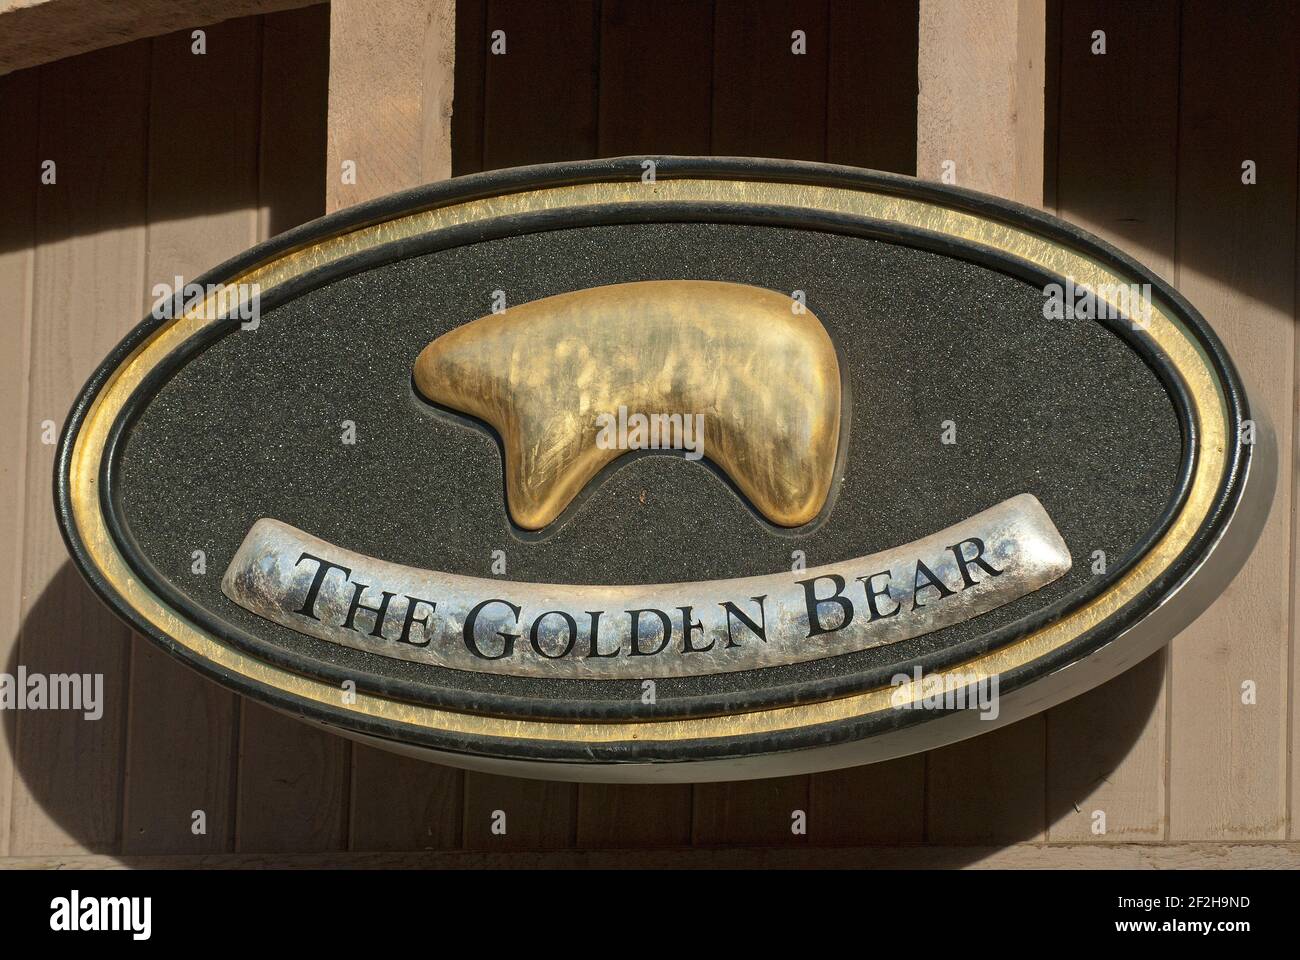 The Golden Bear jewelry store sign in Vail, Eagle County, Colorado, USA Stock Photo